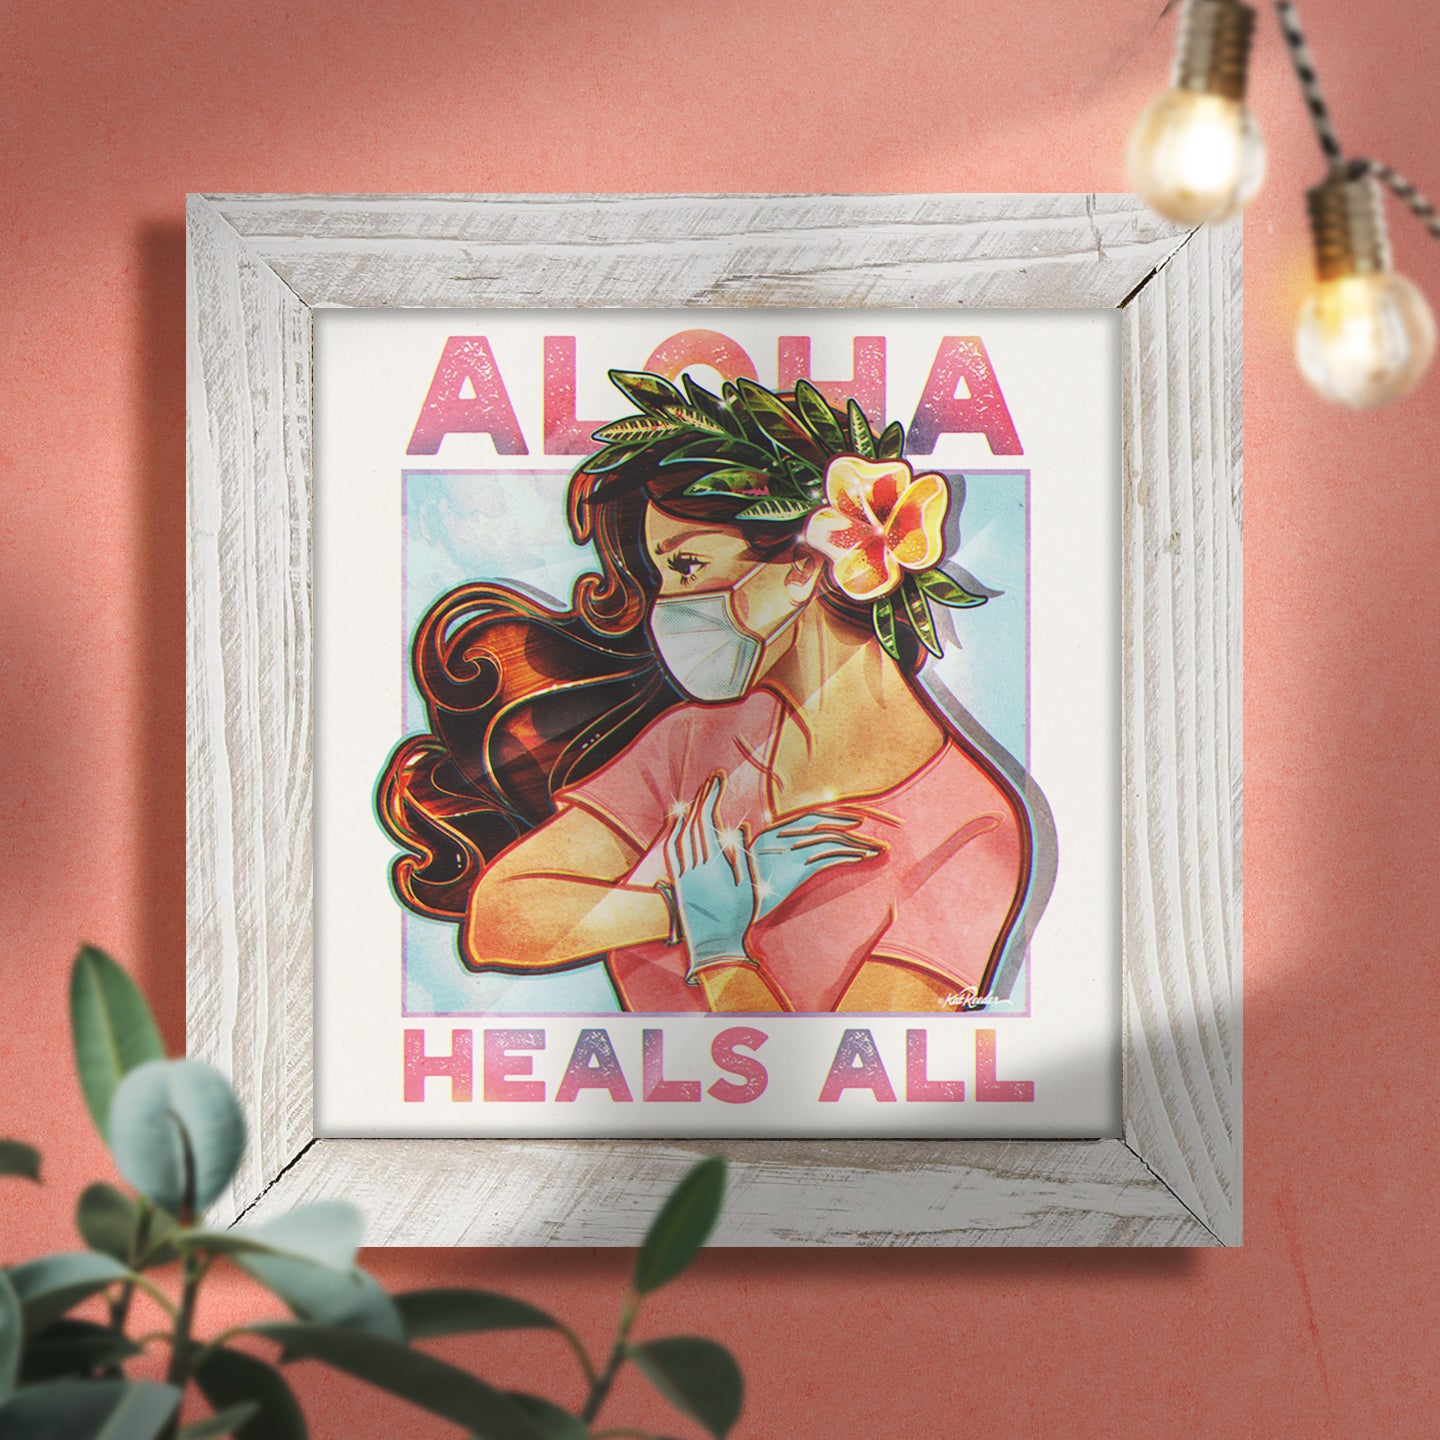 fine art print of a hawaiian nurse dancing hula in the style of a vintage poster, in a white frame, hung on a peach colored wall